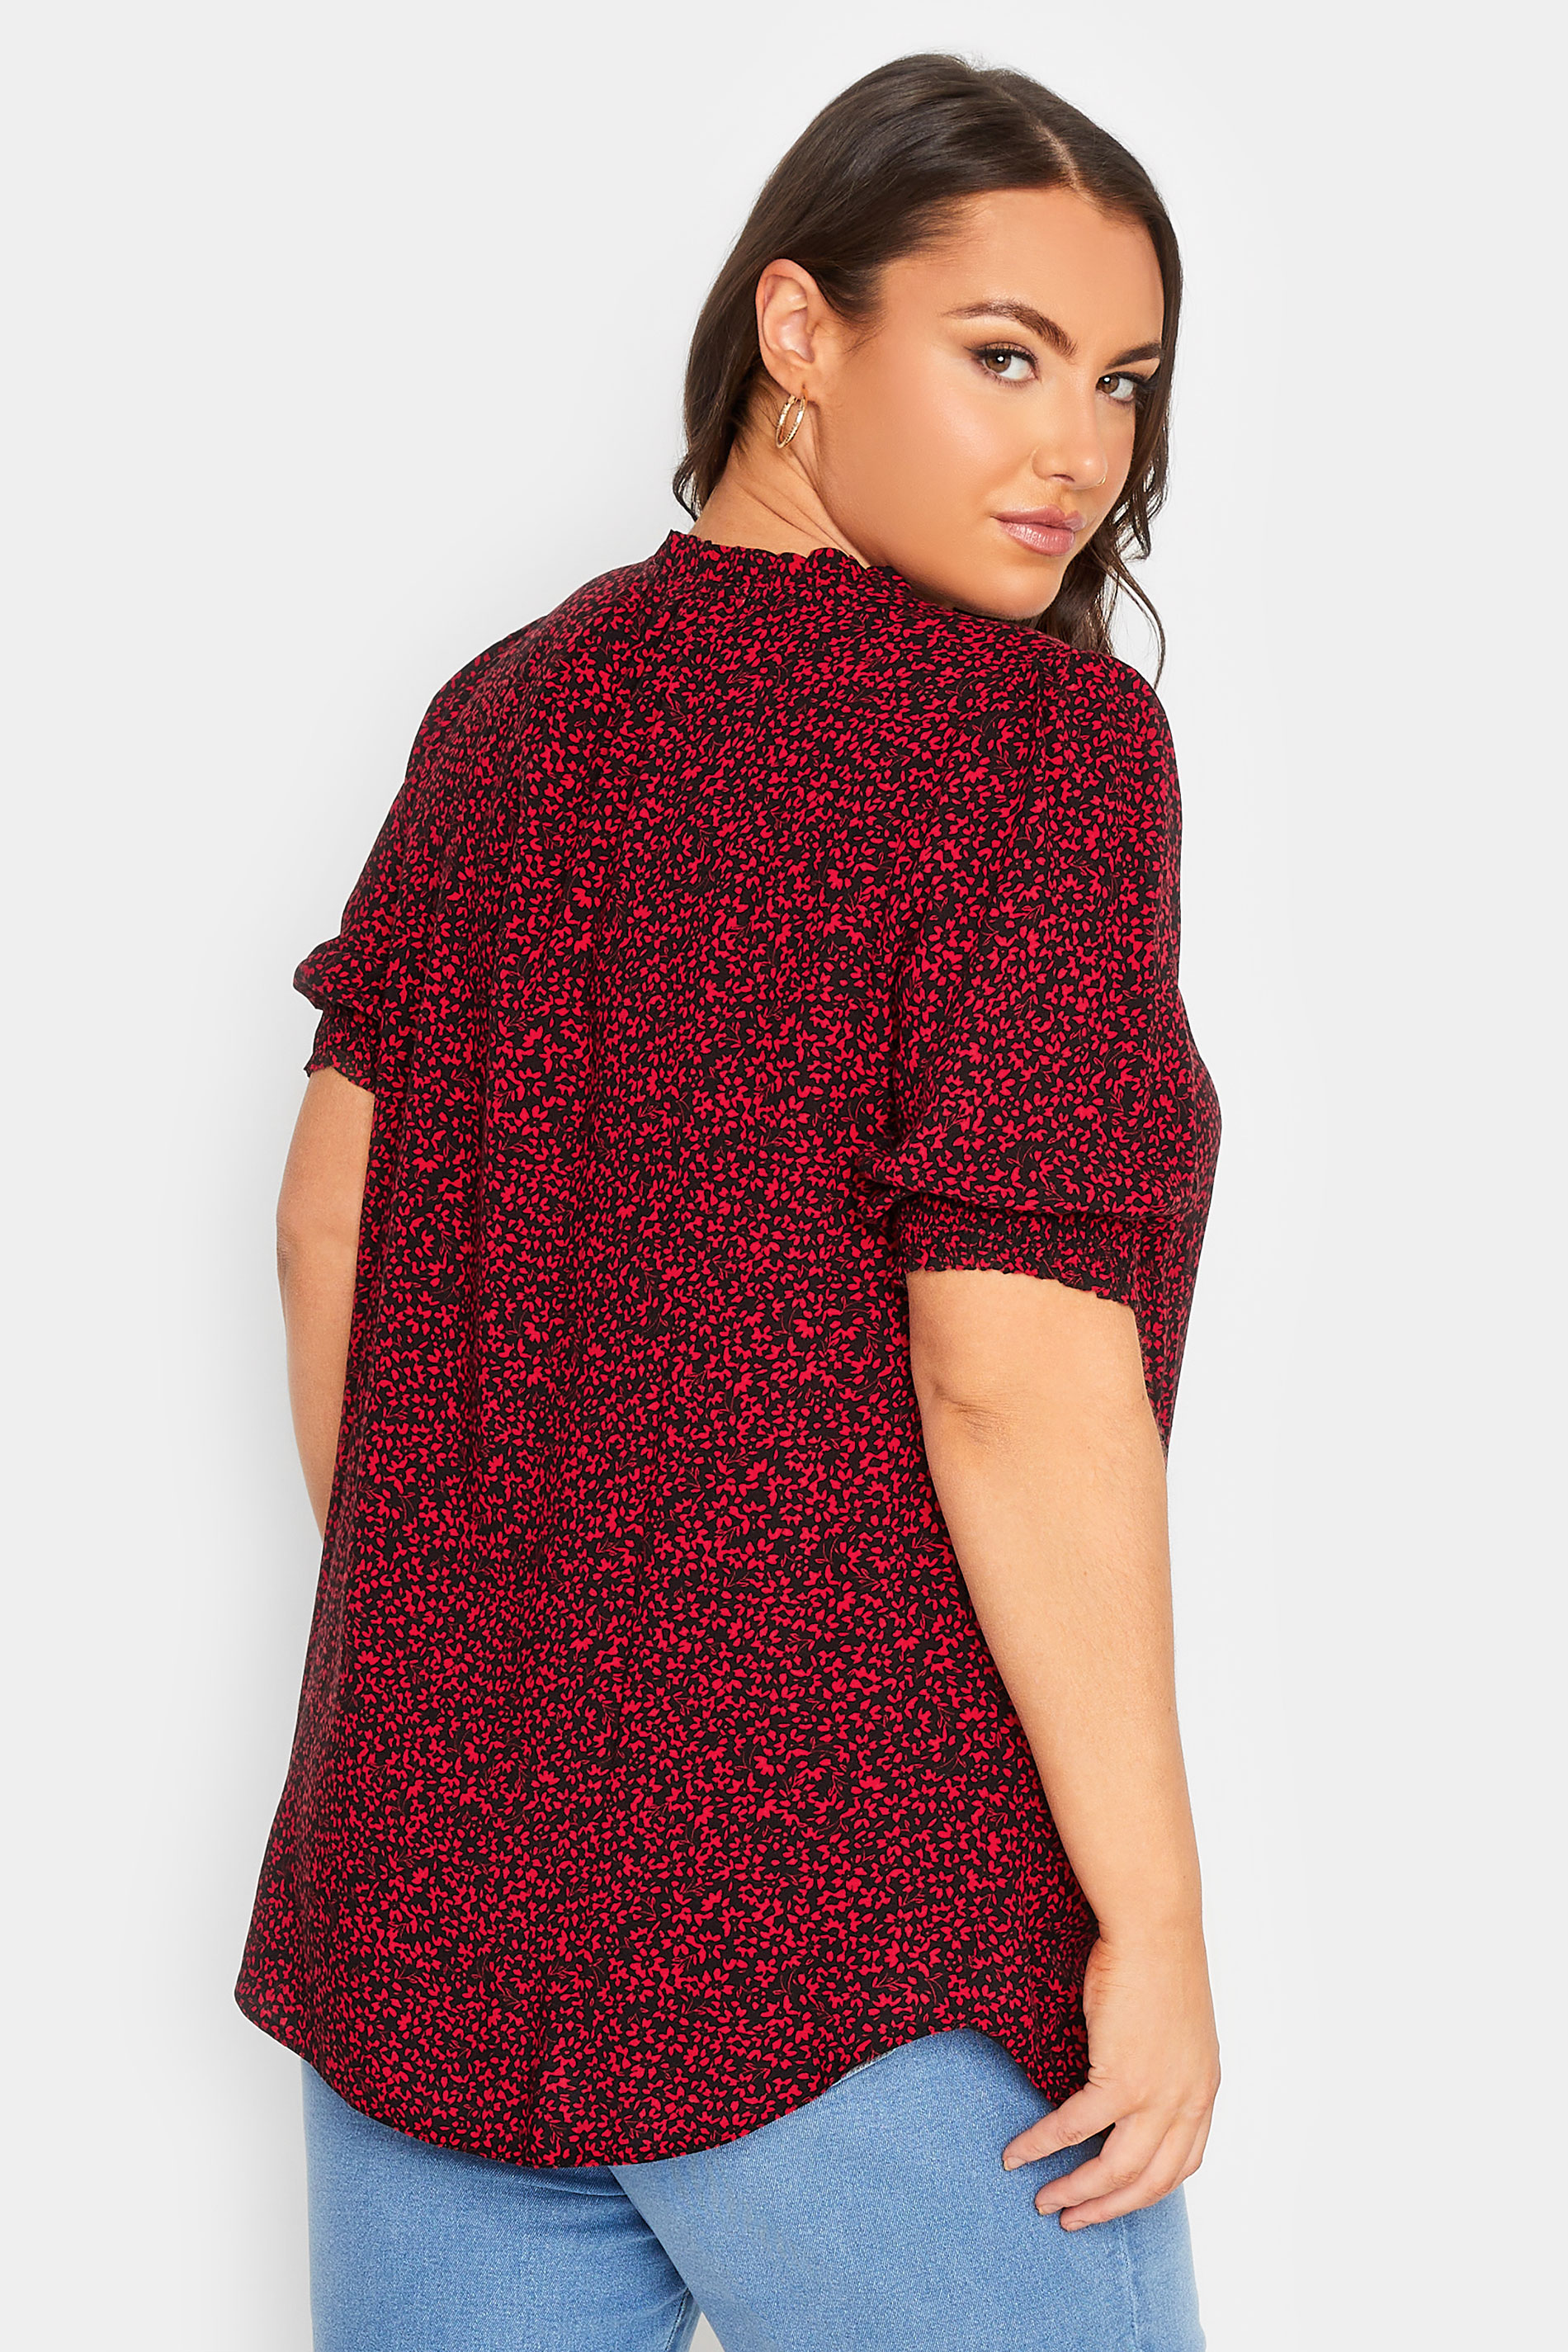 YOURS Plus Size Black & Red Floral Print Tie Neck Blouse | Yours Clothing 3